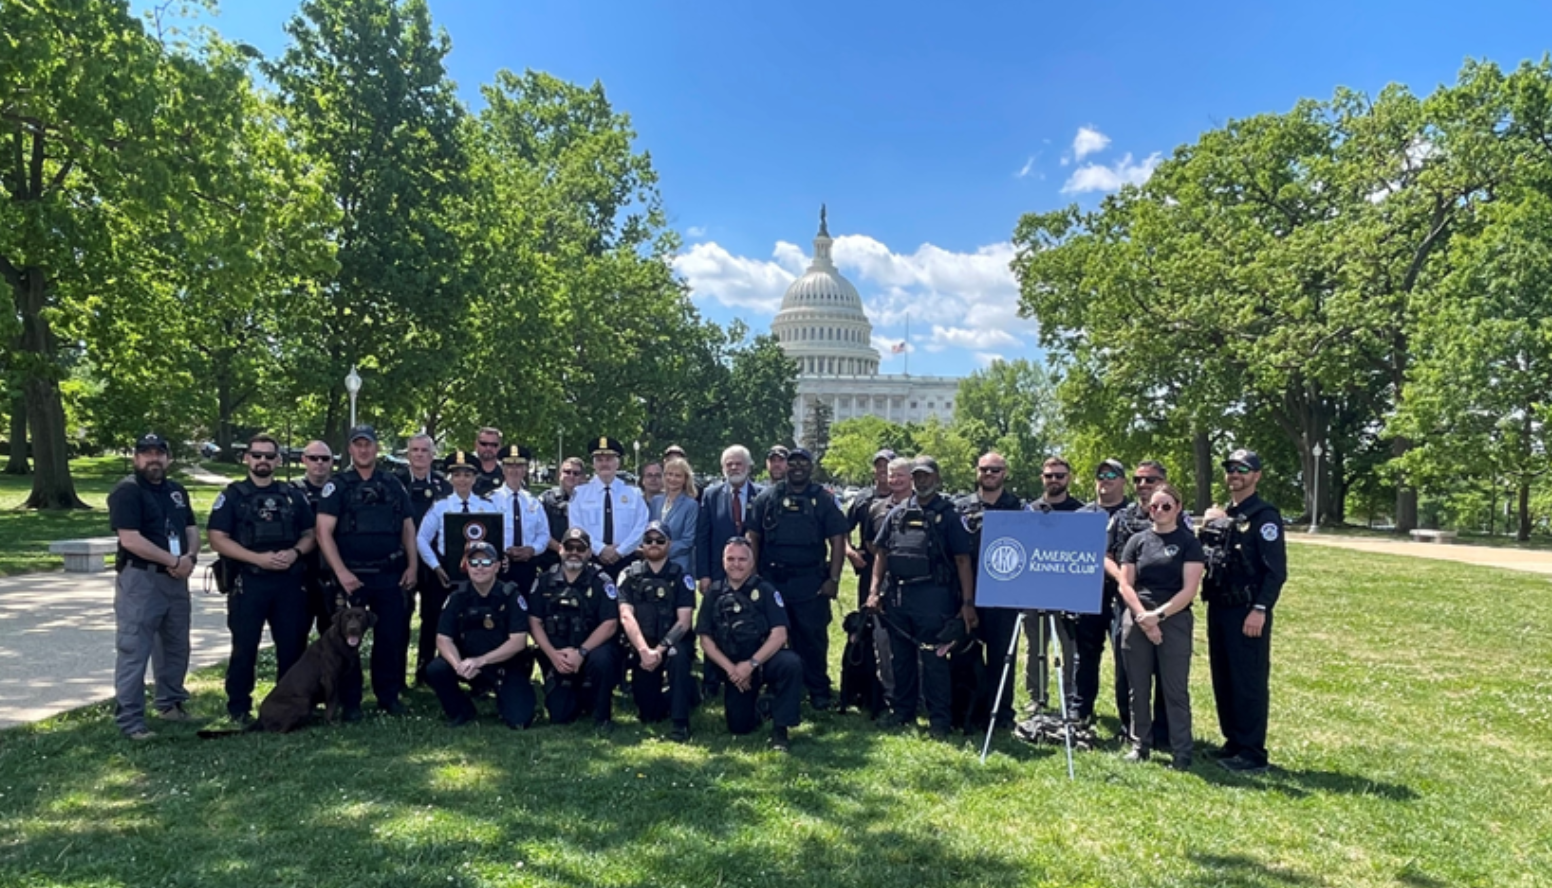 Capitol Police K-9 unit awarded with American Kennel Club's Canine Officer Program Award